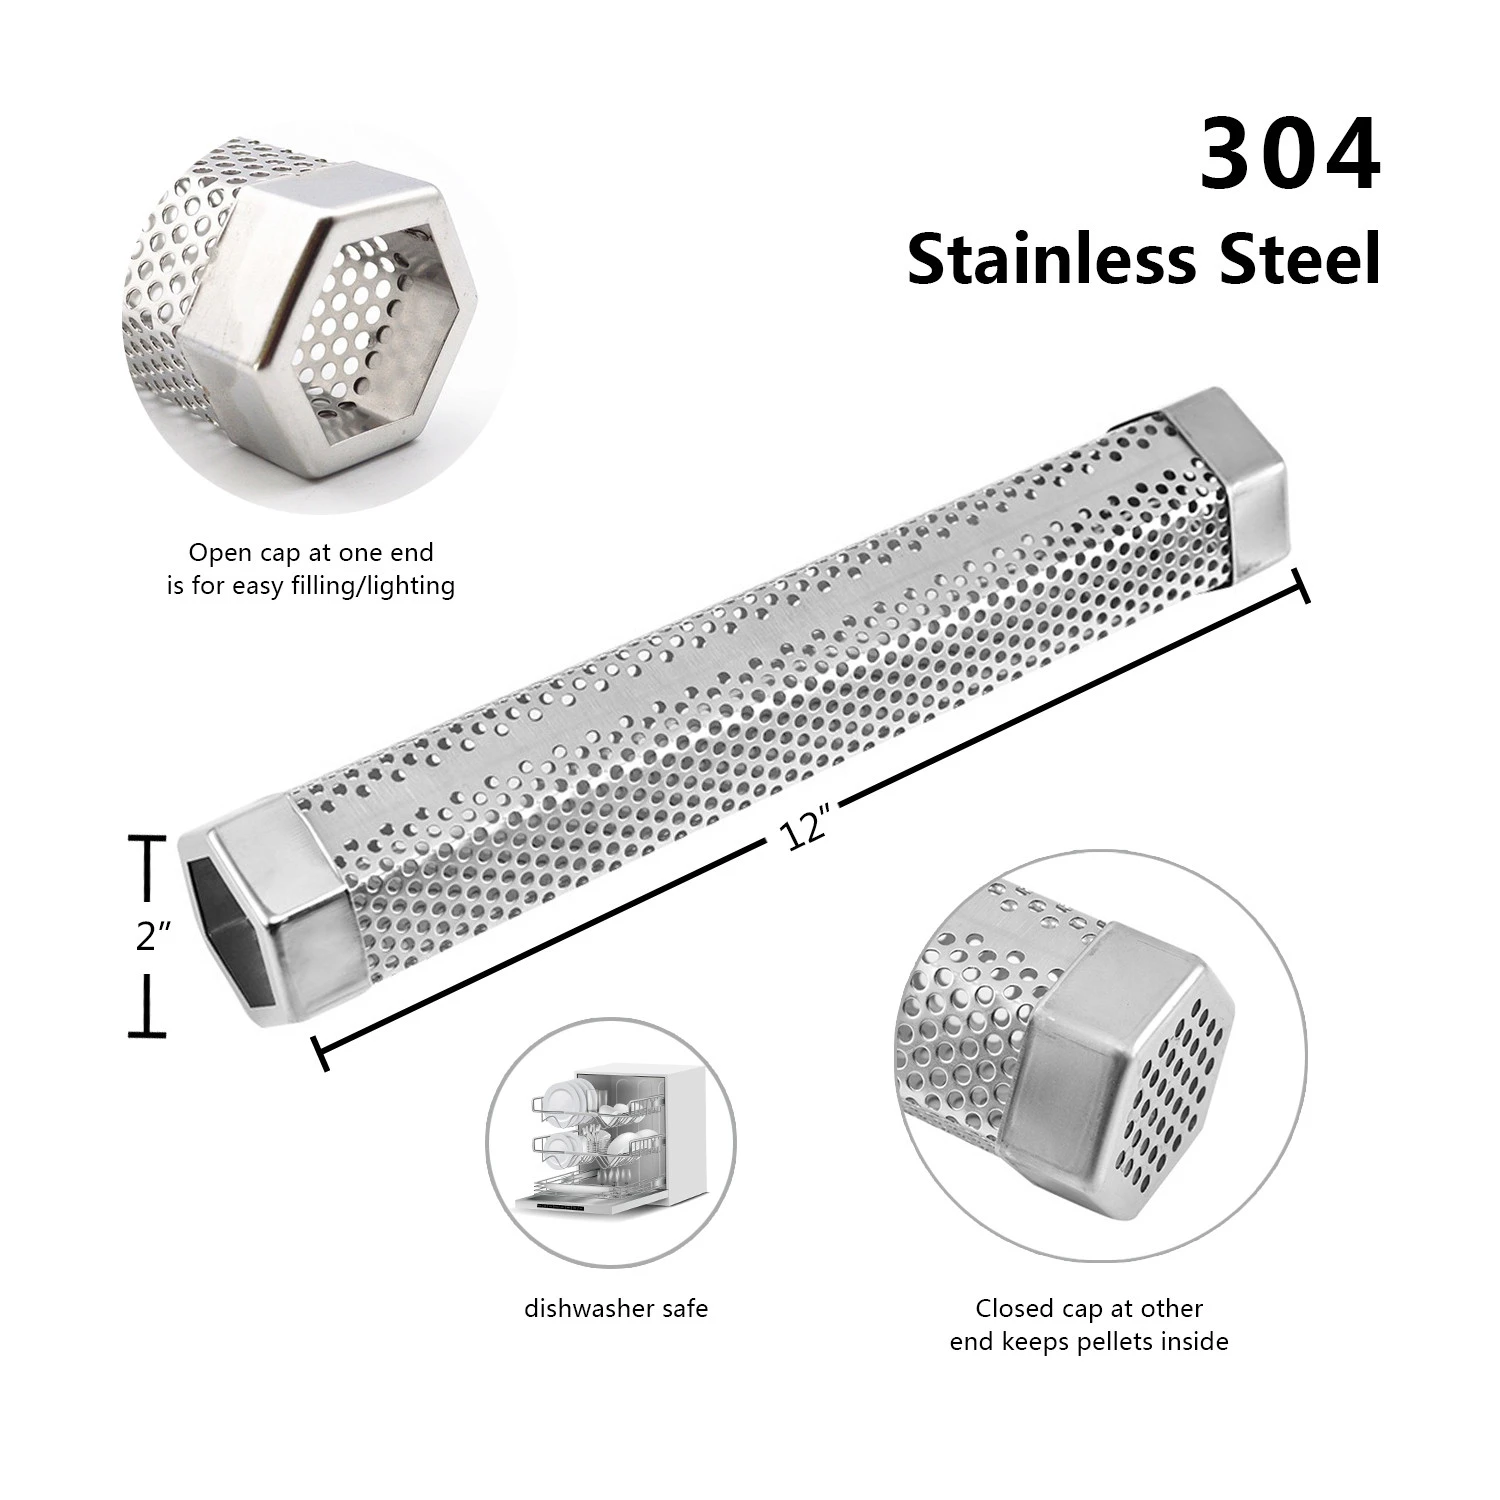 12" Hexagon Stainless Steel Portable Hot or Cold Smoking Tube BBQ Pellet Smoker tube